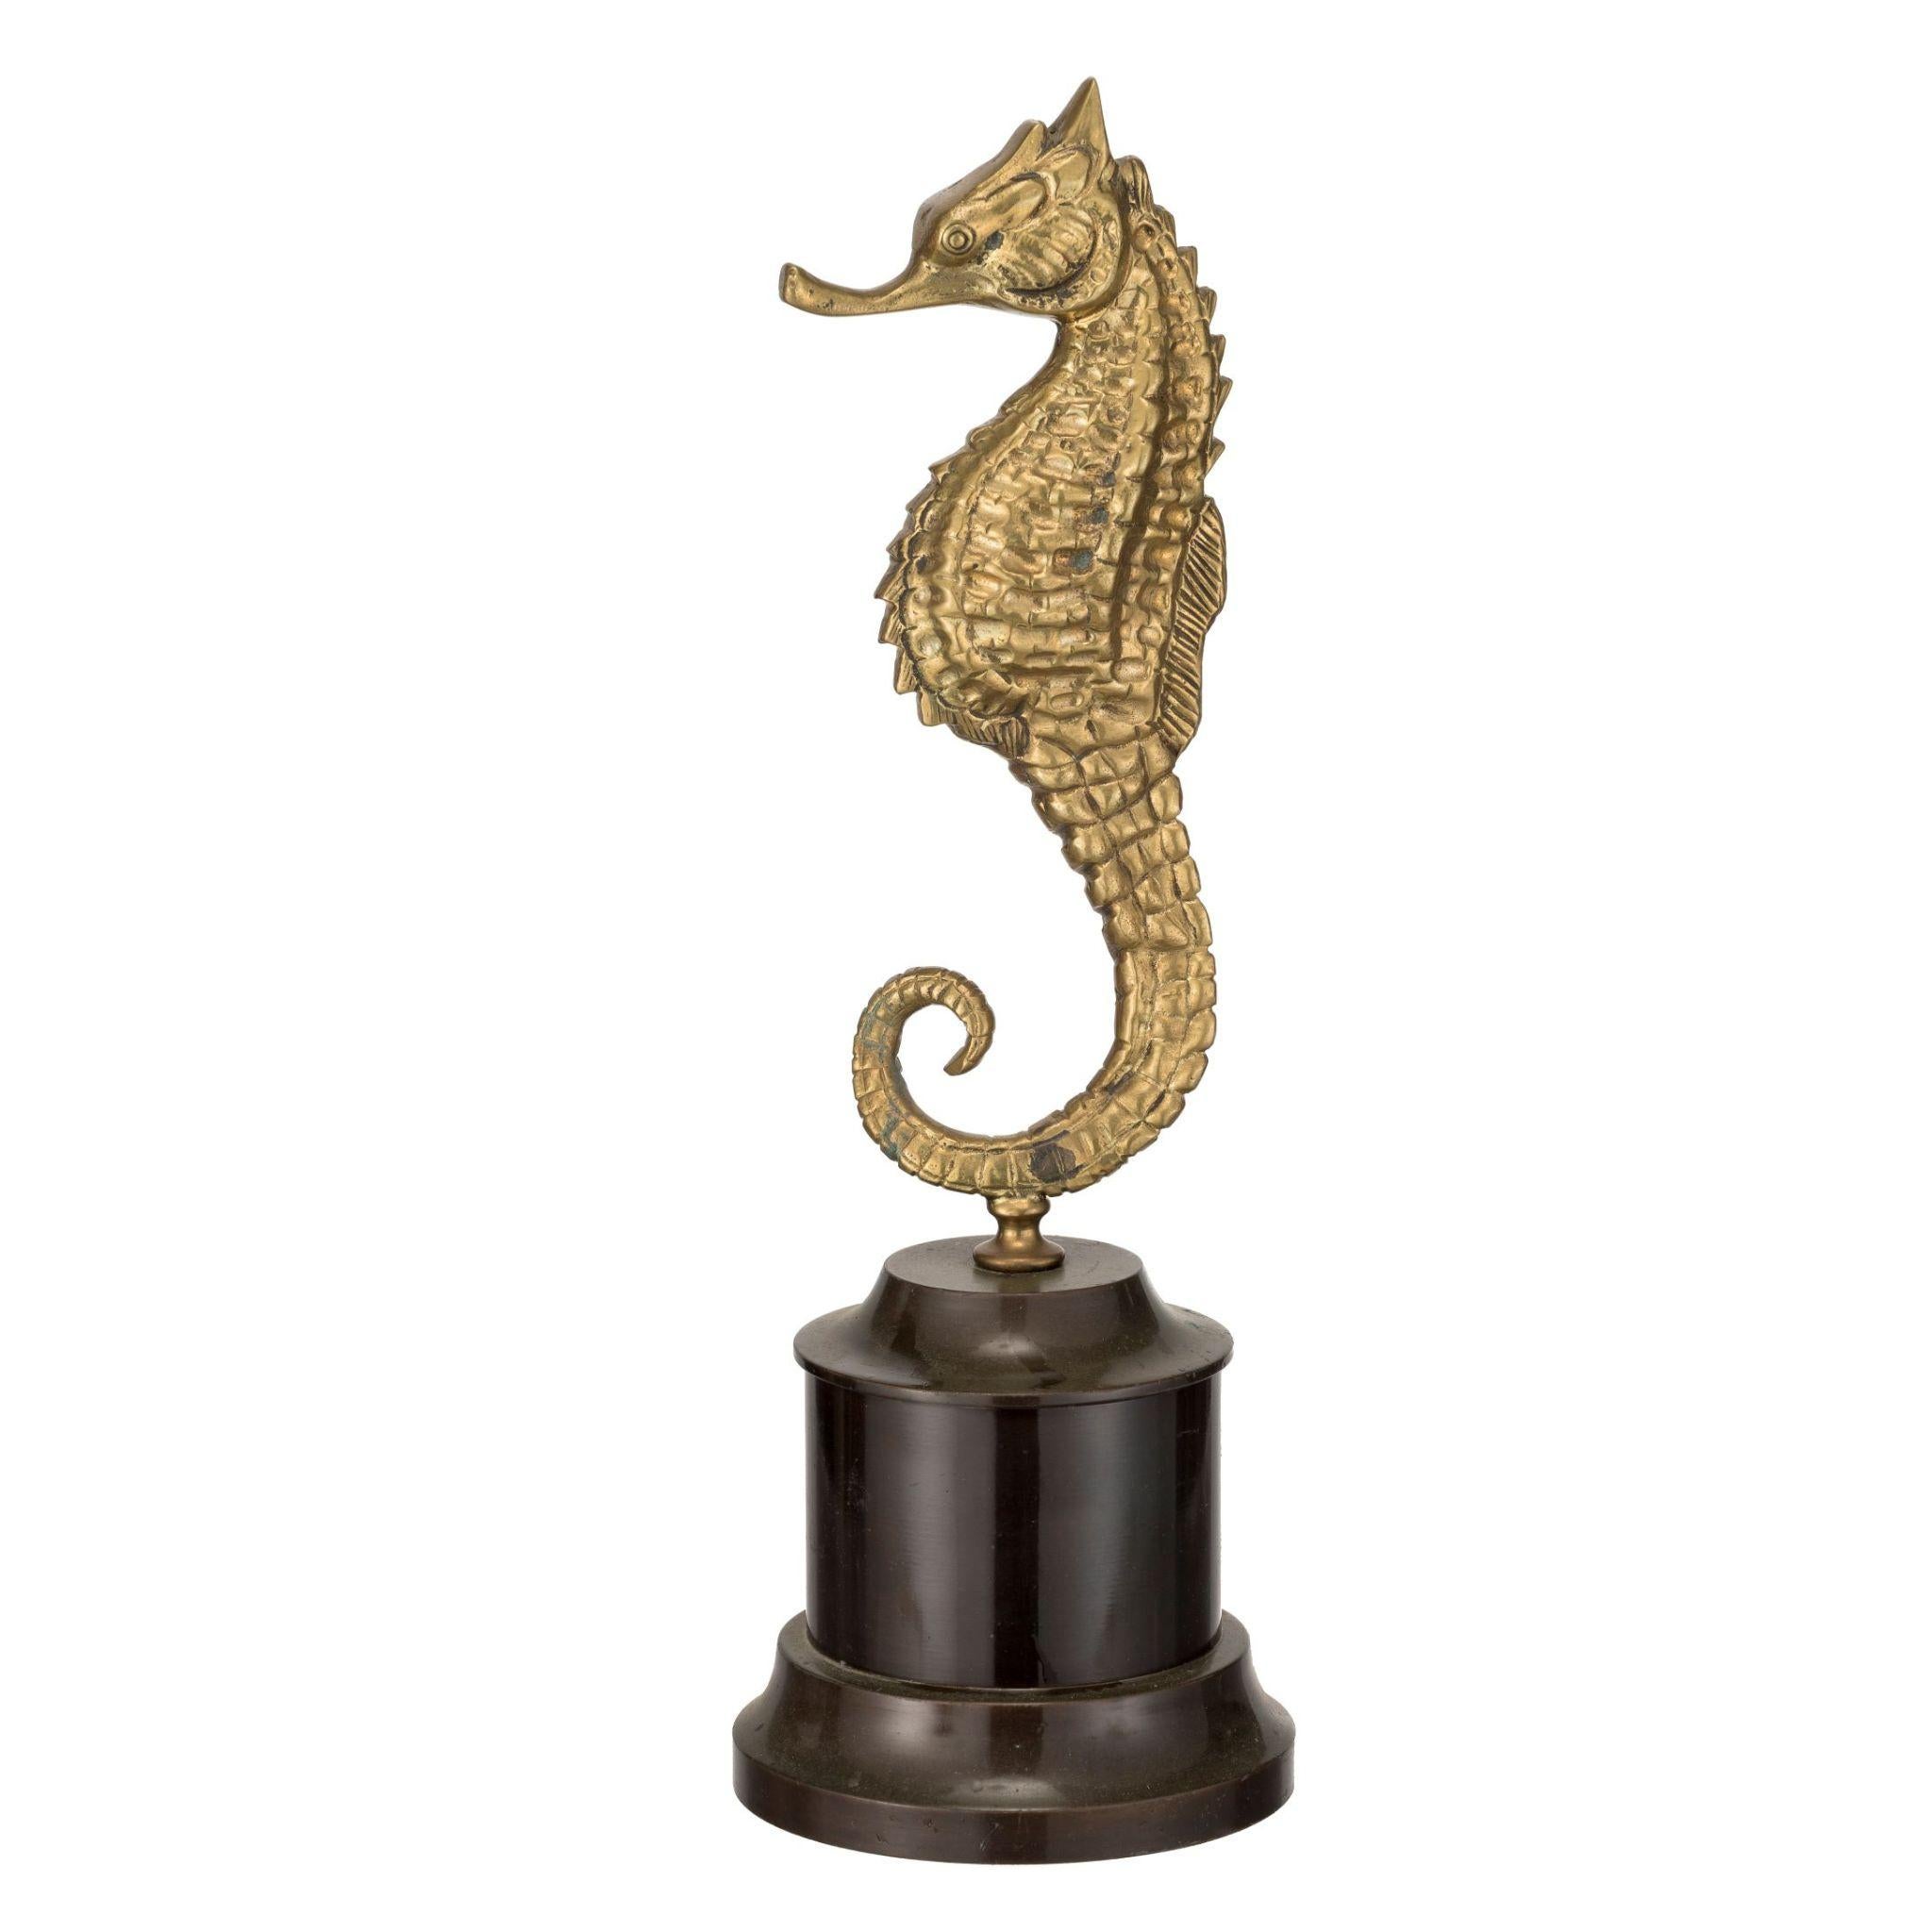 This beautiful brass seahorse is a stunning addition to any coastal or nautical-themed decor. With intricate detailing and a unique, eye-catching design, this piece is sure to impress. The seahorse is set on a solid black marble base, providing